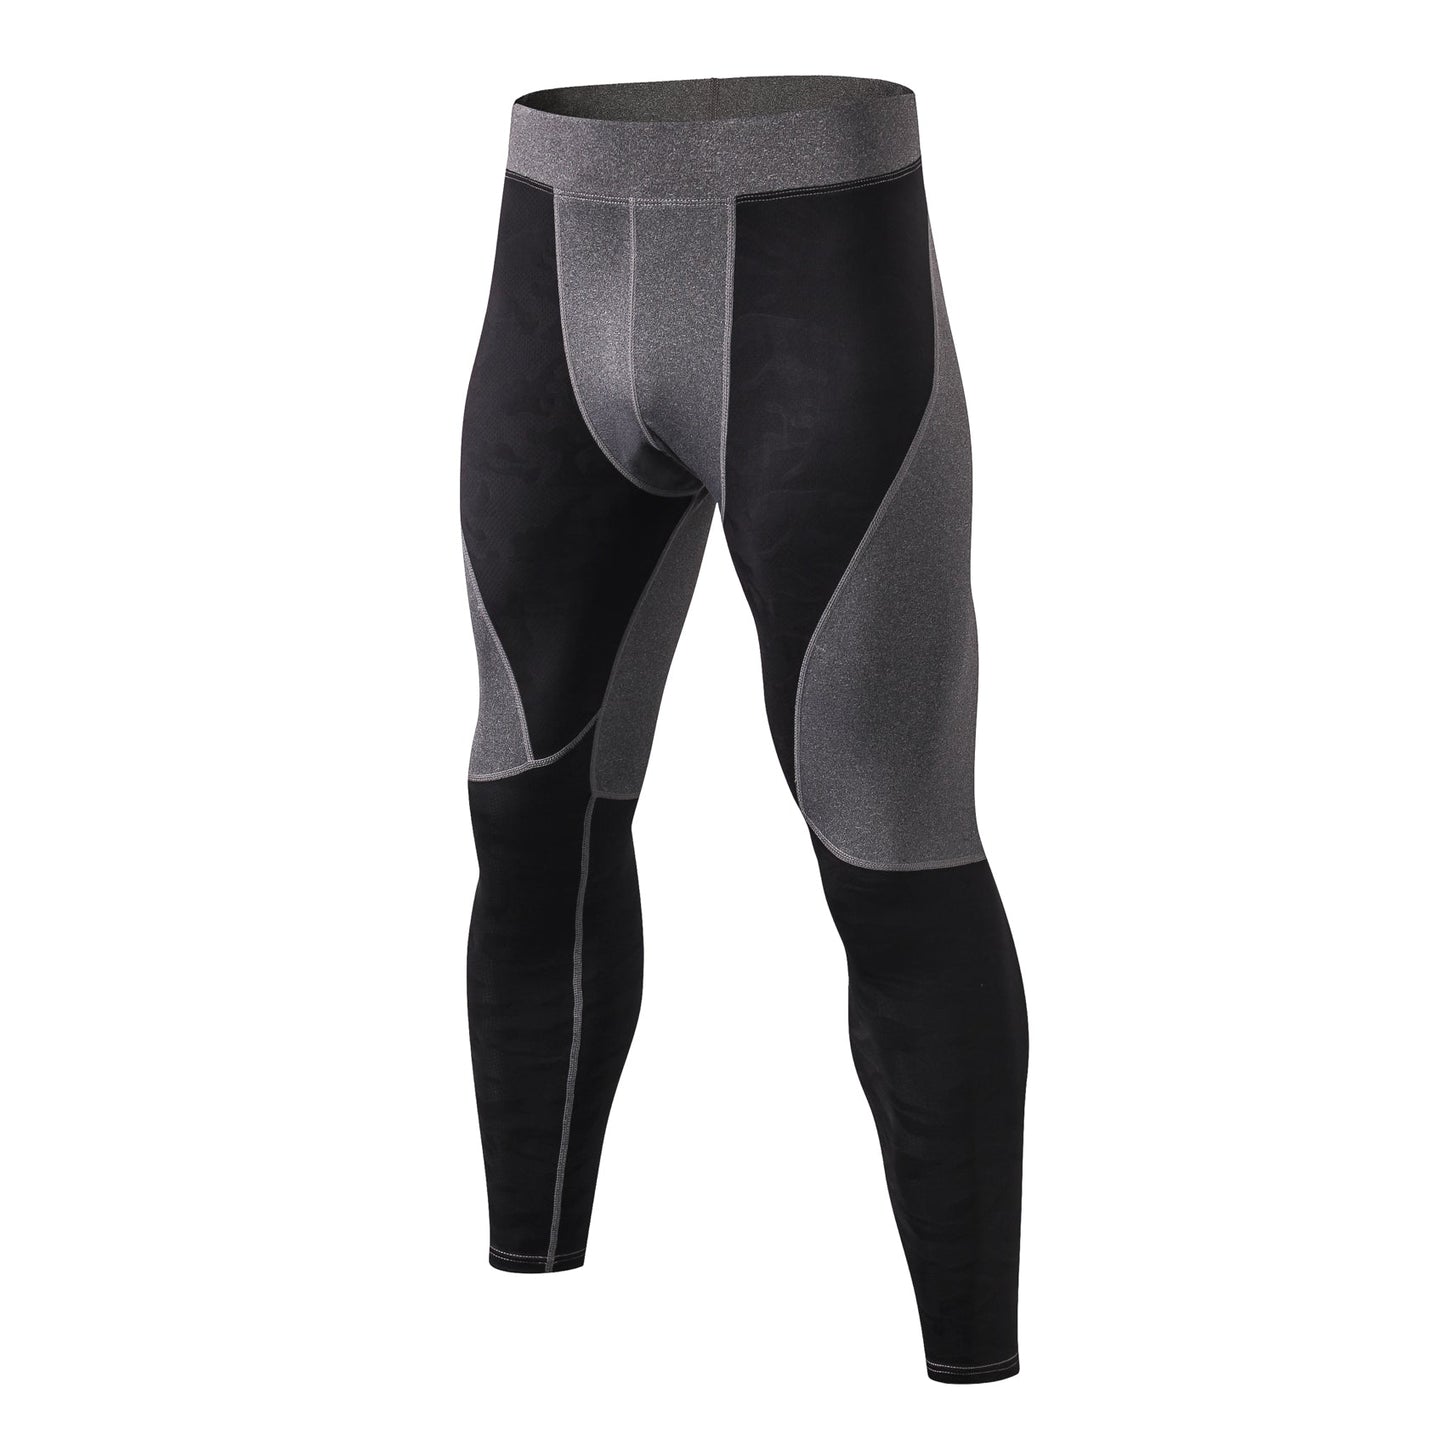 Mens Compression Pants Running Tights Quick Dry Workout Athletic Long Gym Base Layer LANBAOSI